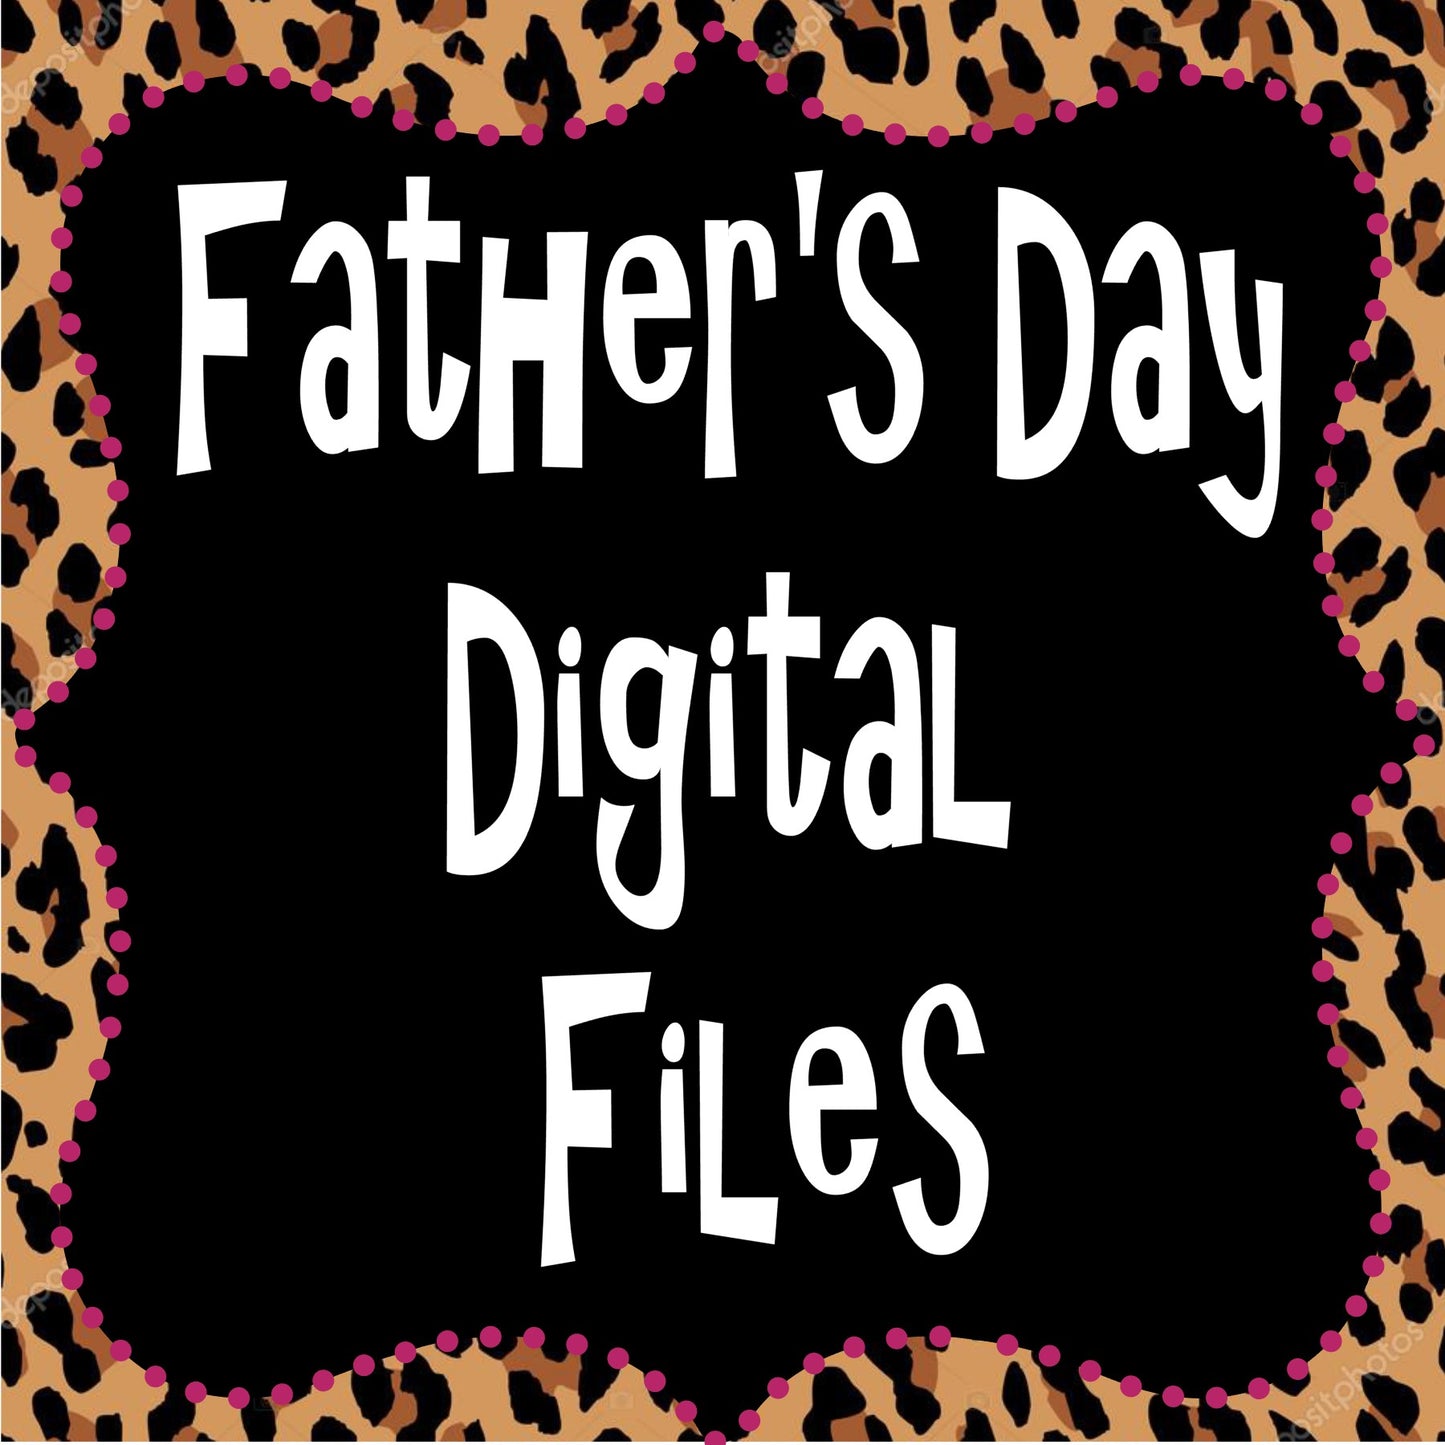 FATHERS DAY - DIGITAL FILES